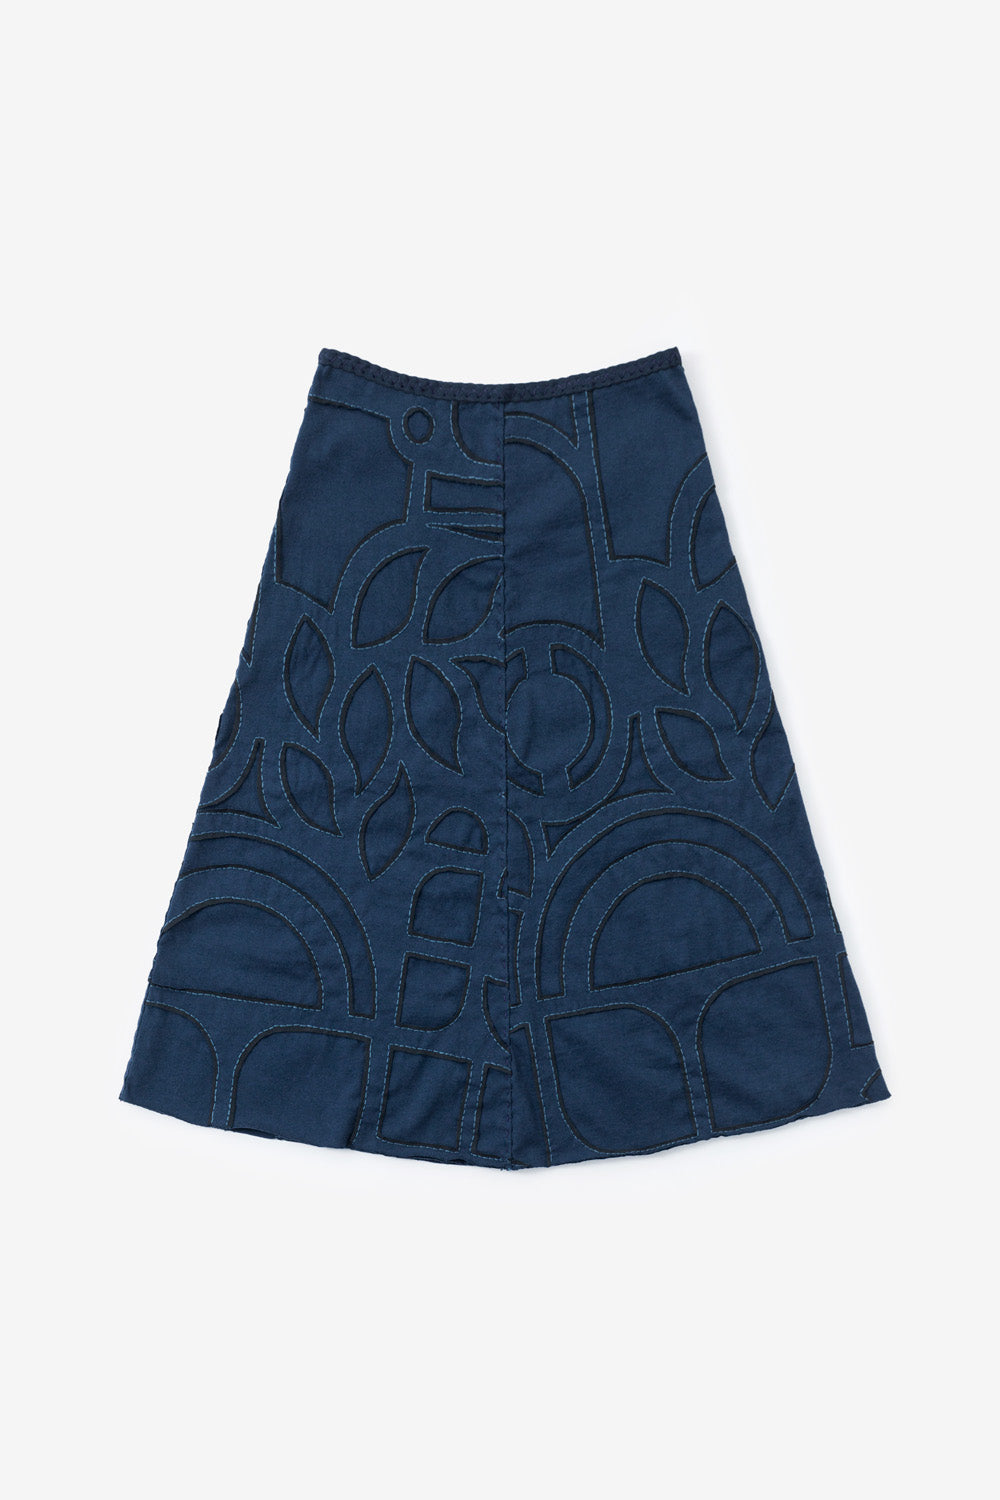 The School of Making The Embroidered Swing Skirt Kit Abstract Blue Hand-Sewn DIY Skirt